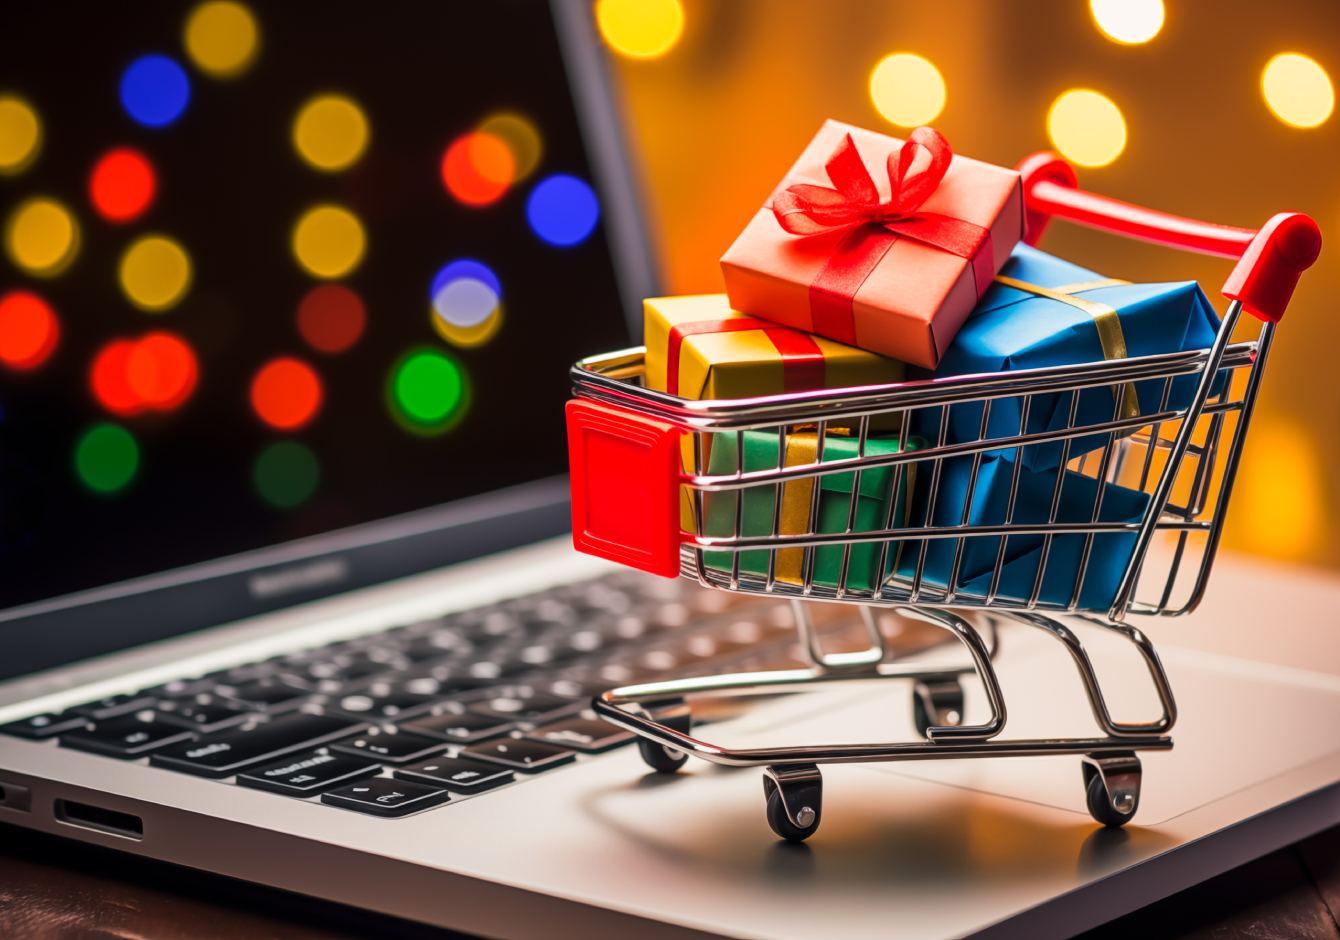 Miniature shopping cart filled with Christmas gifts sitting on laptop keyboard with festive lights behind